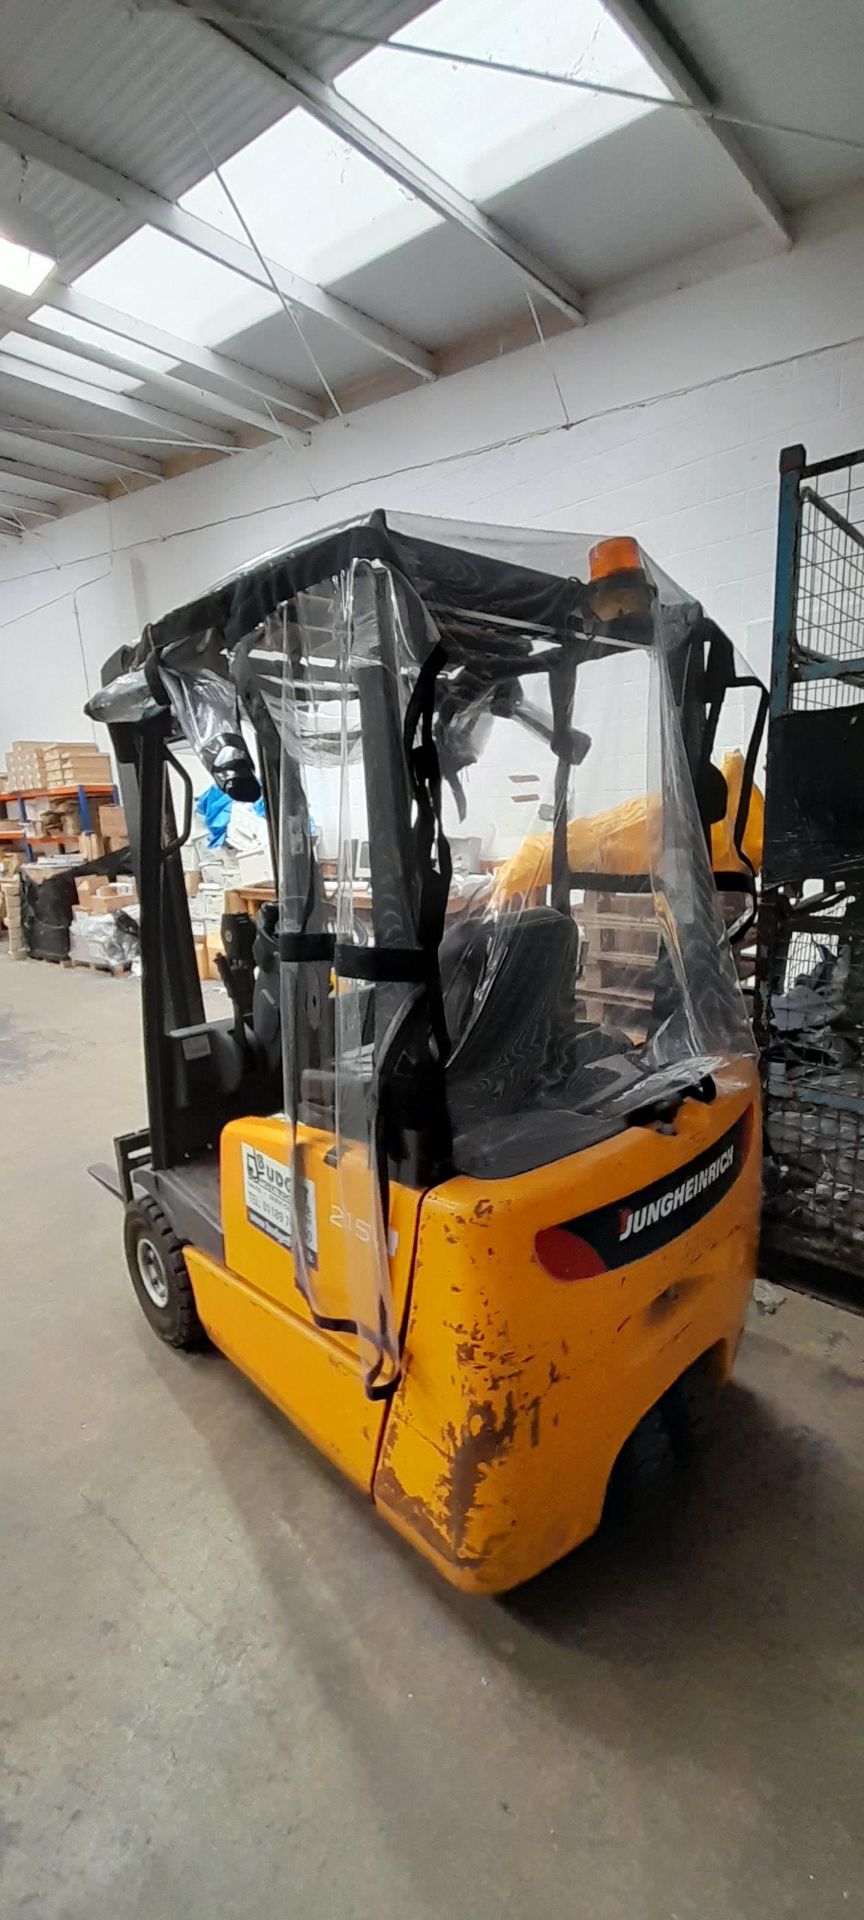 Jungheinrich, EFG 215n, 1,500kg electric forklift truck, 7702 hours, year 2004, S/N: FN315226 with - Image 4 of 15